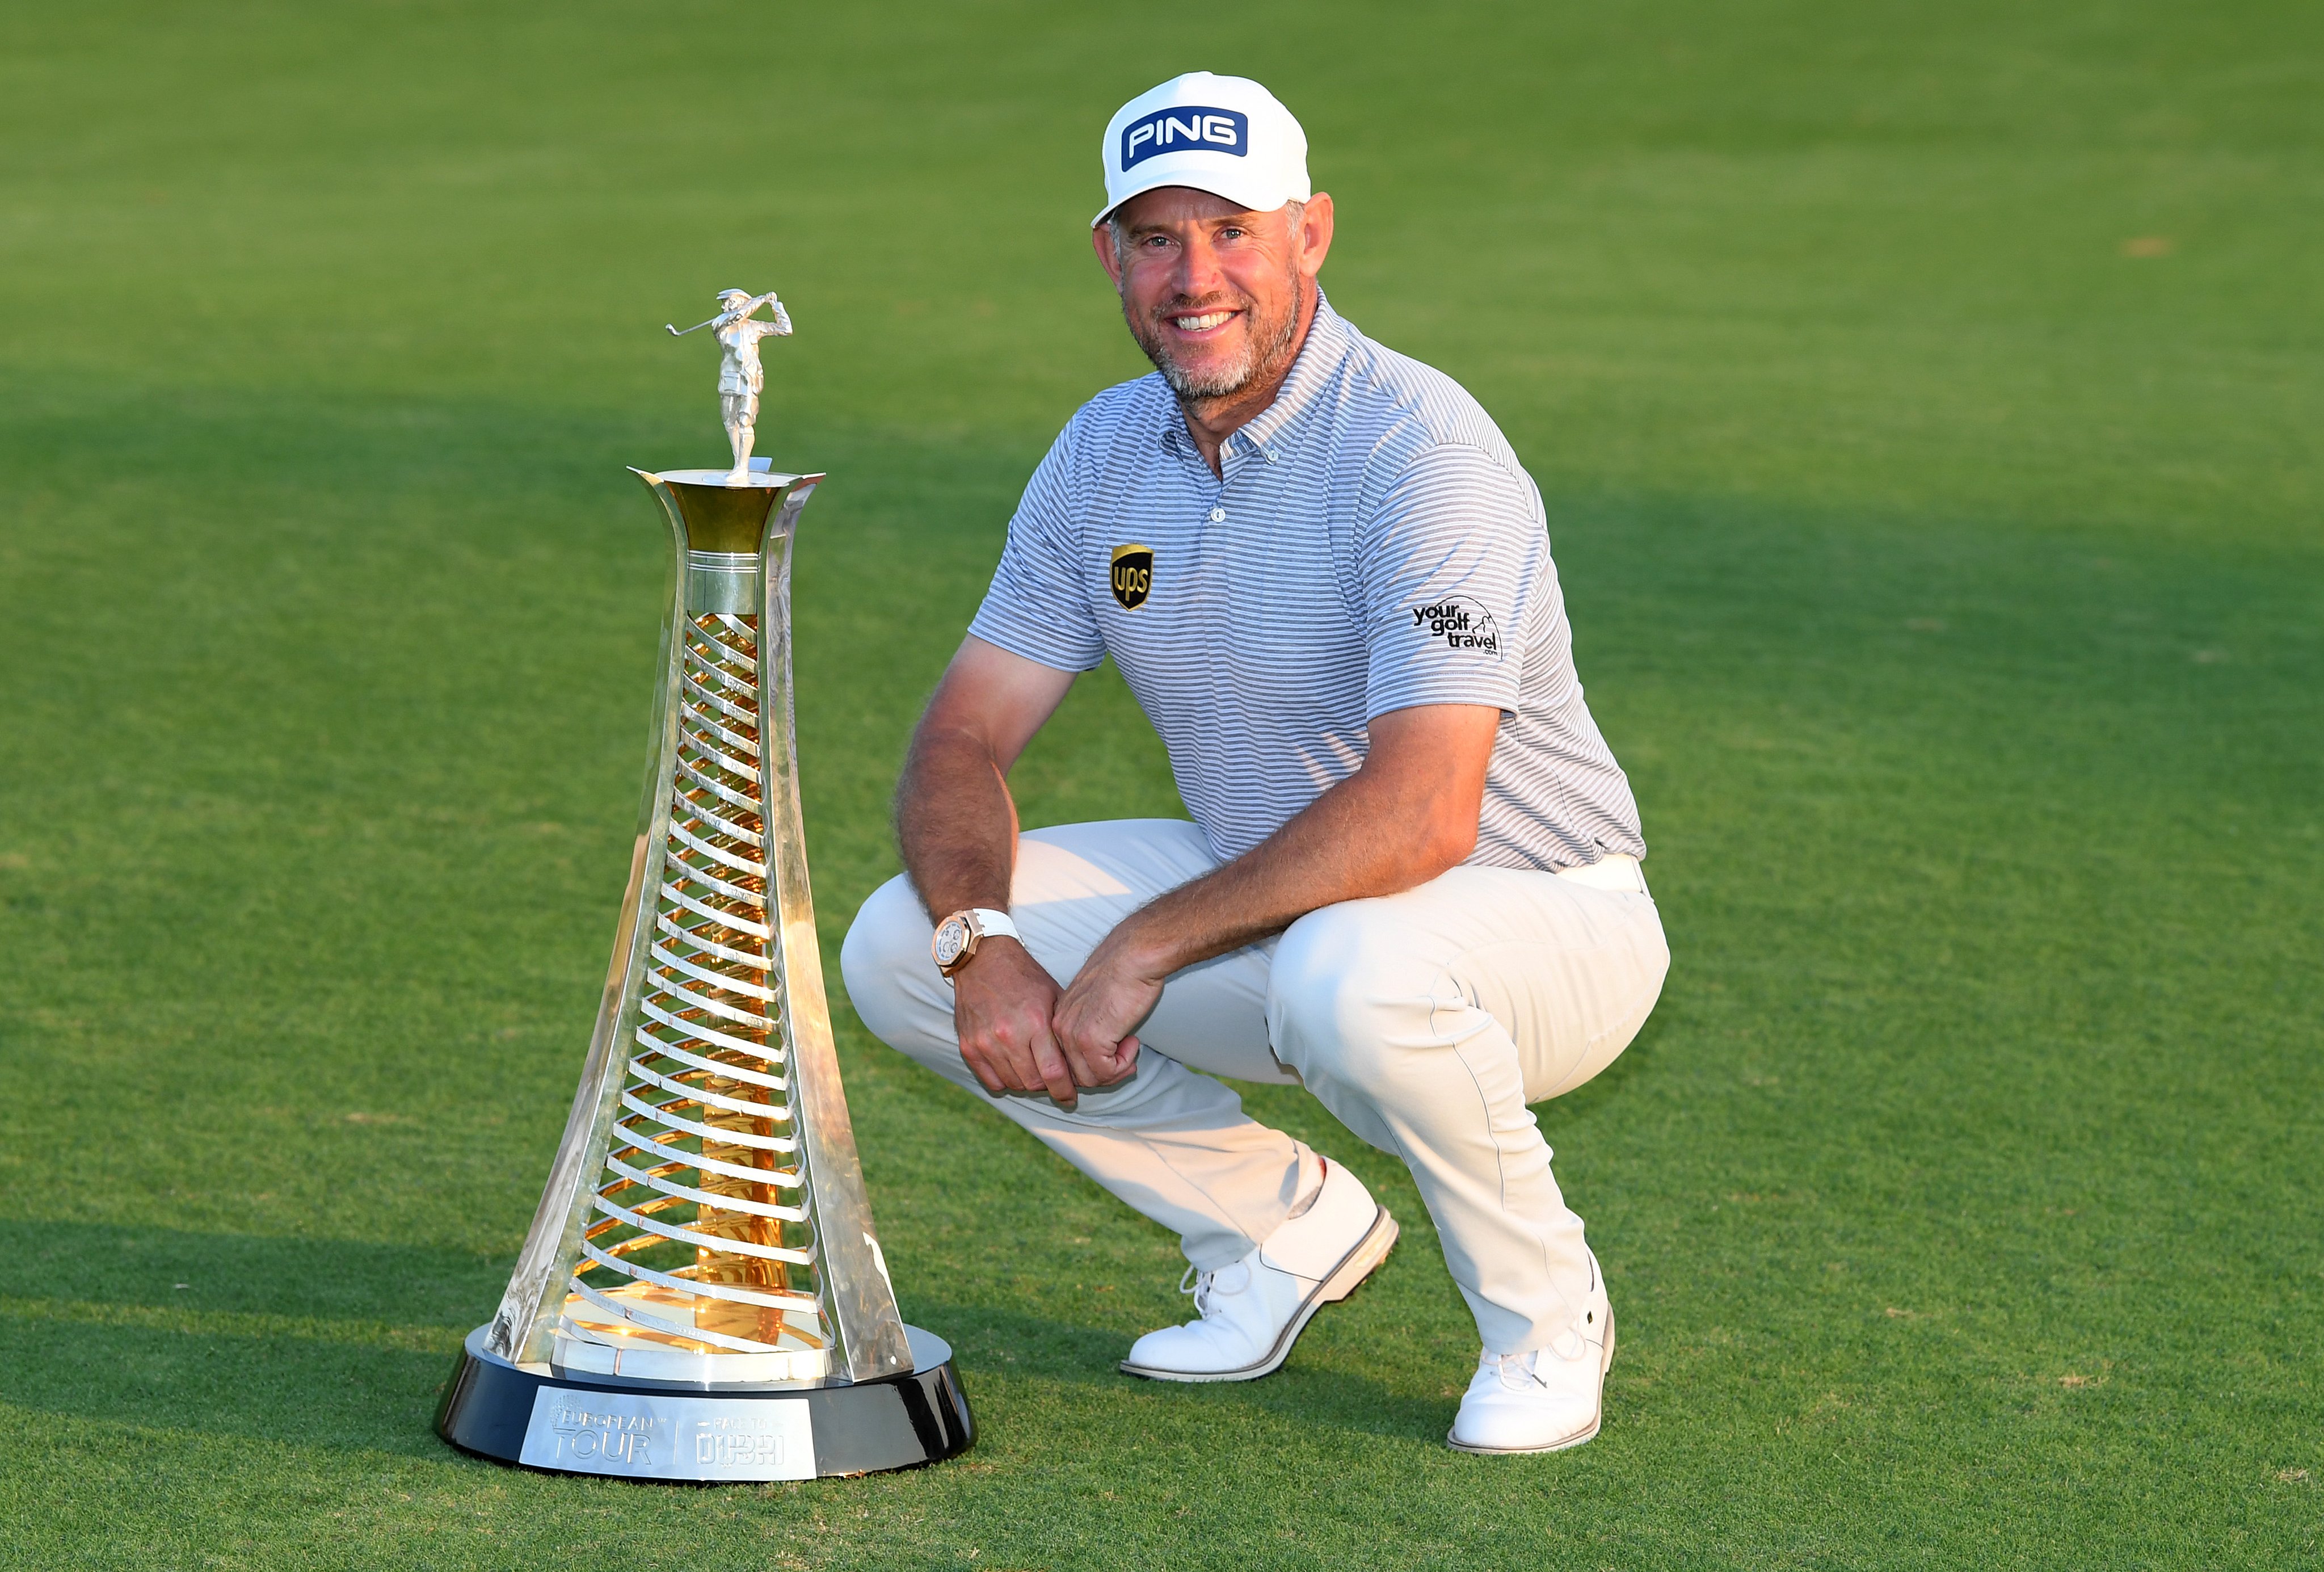 Lee Westwood crowned European Tour Golfer of the Year